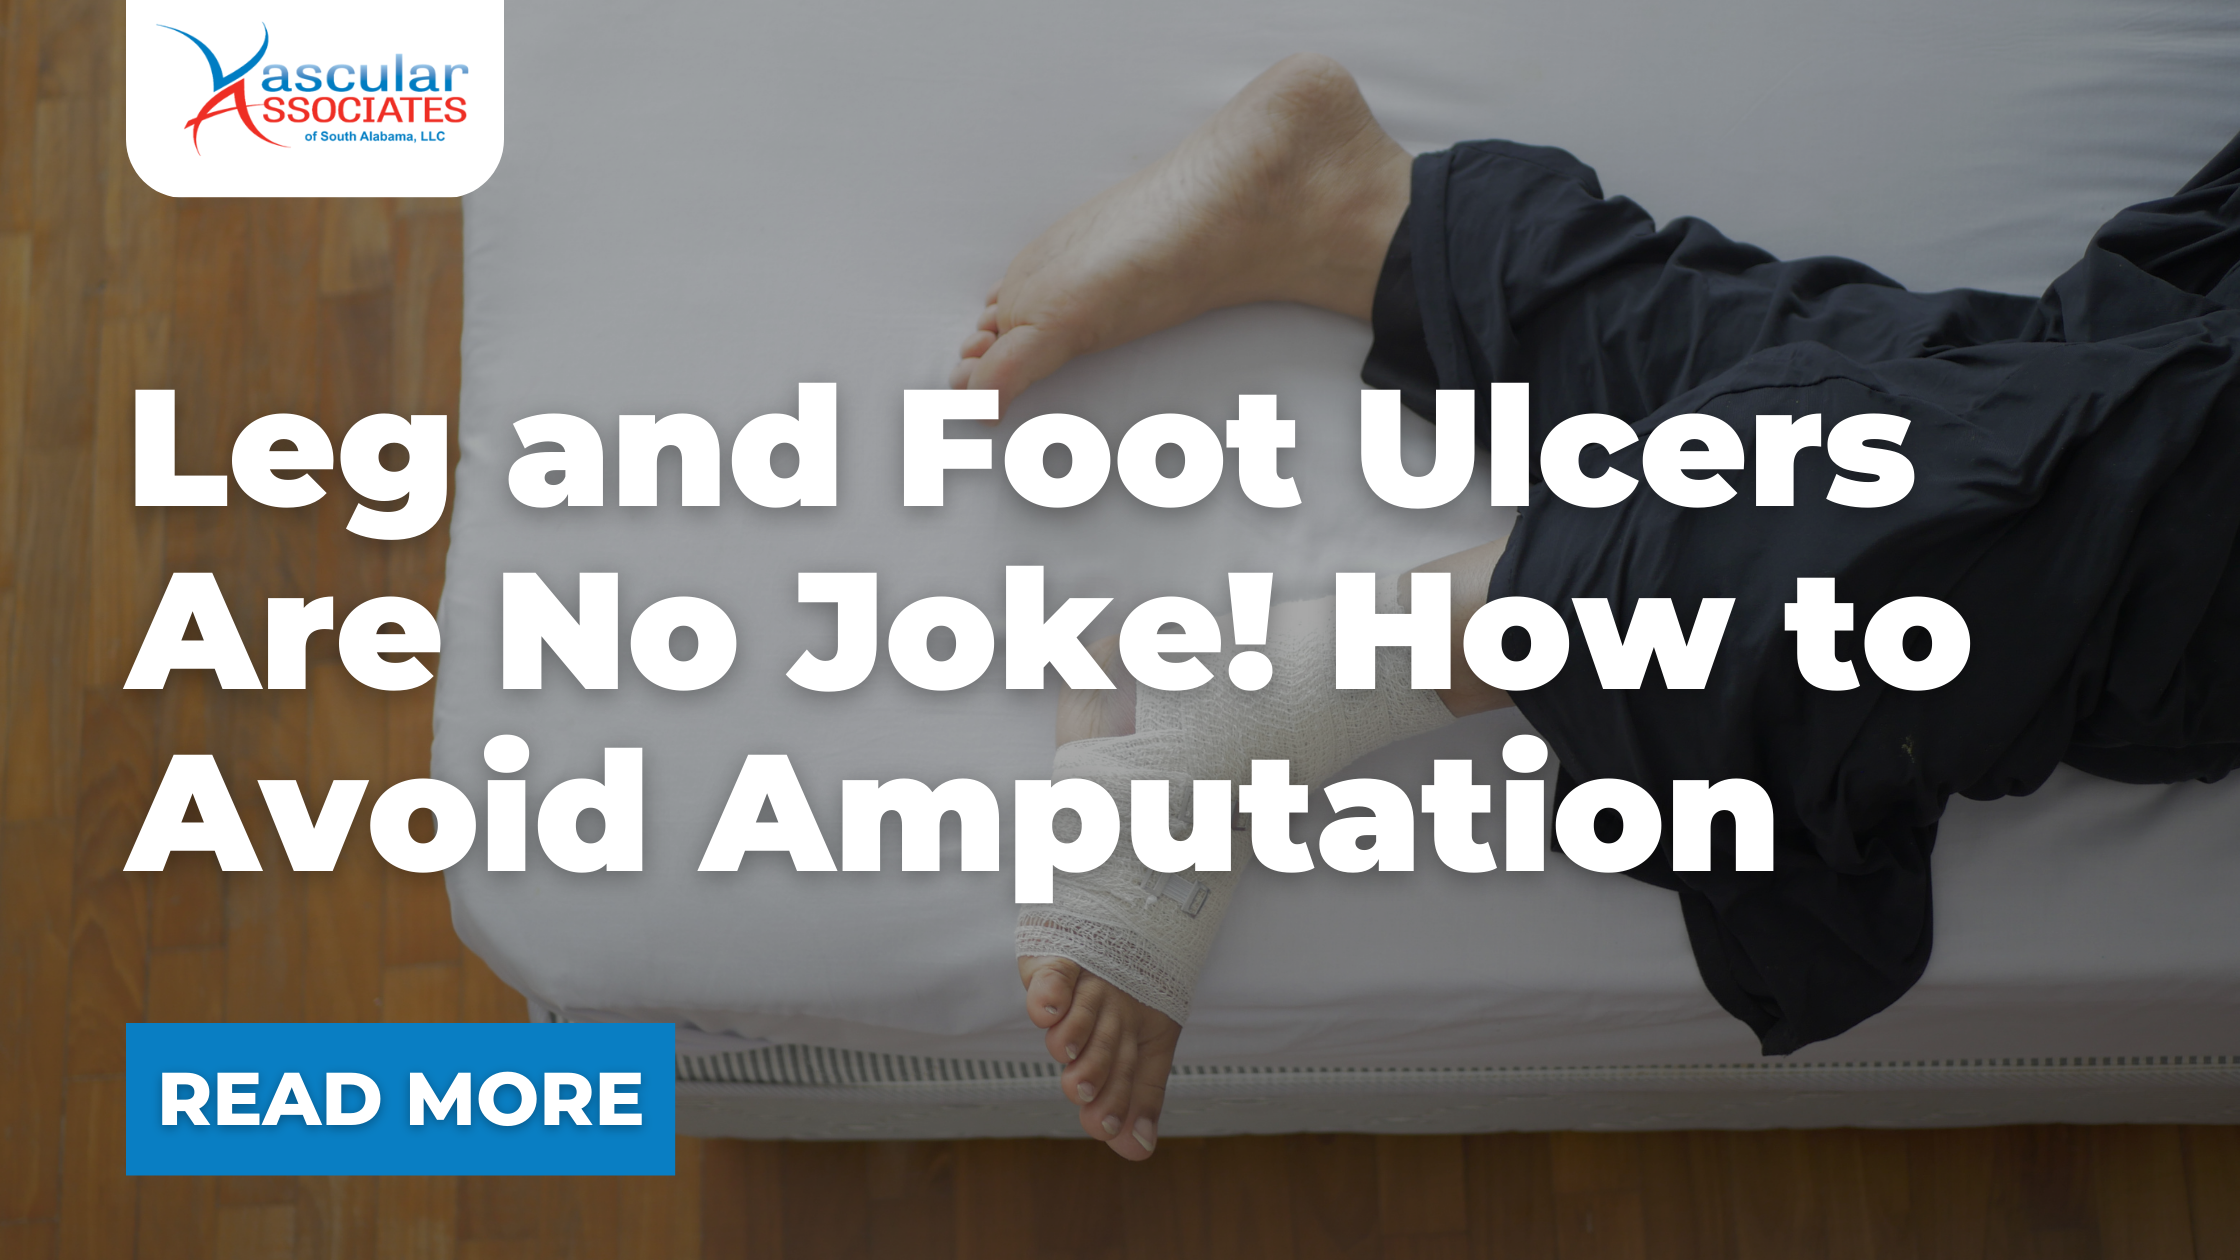 Vascular Blog - Leg and Foot Ulcers Are No Joke! How to Avoid Amputation.png